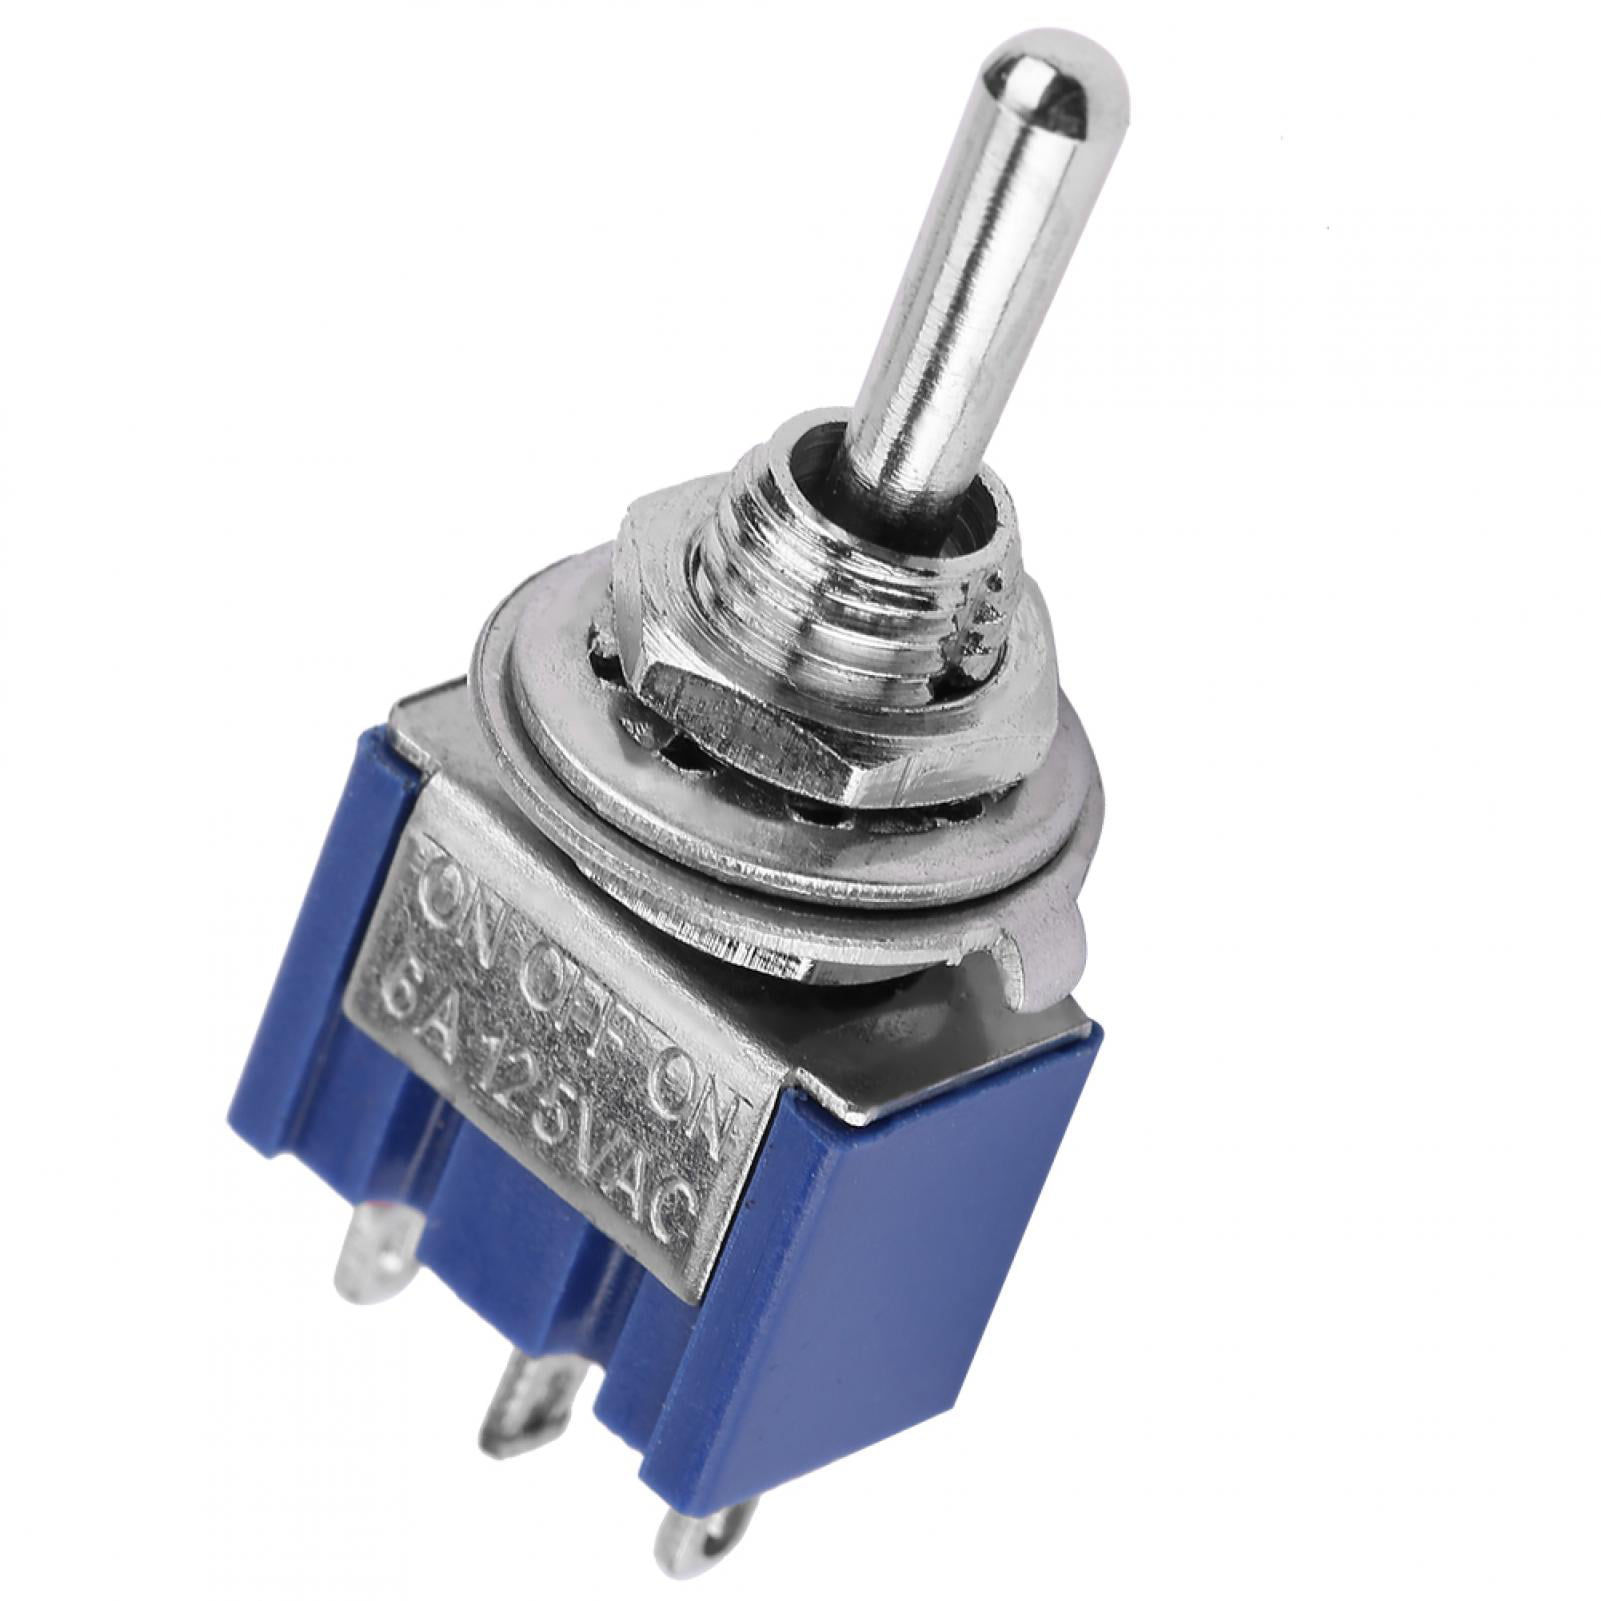 Details about   ON/ON SPDT Mini Toggle Switch 6 amp 125 VAC.